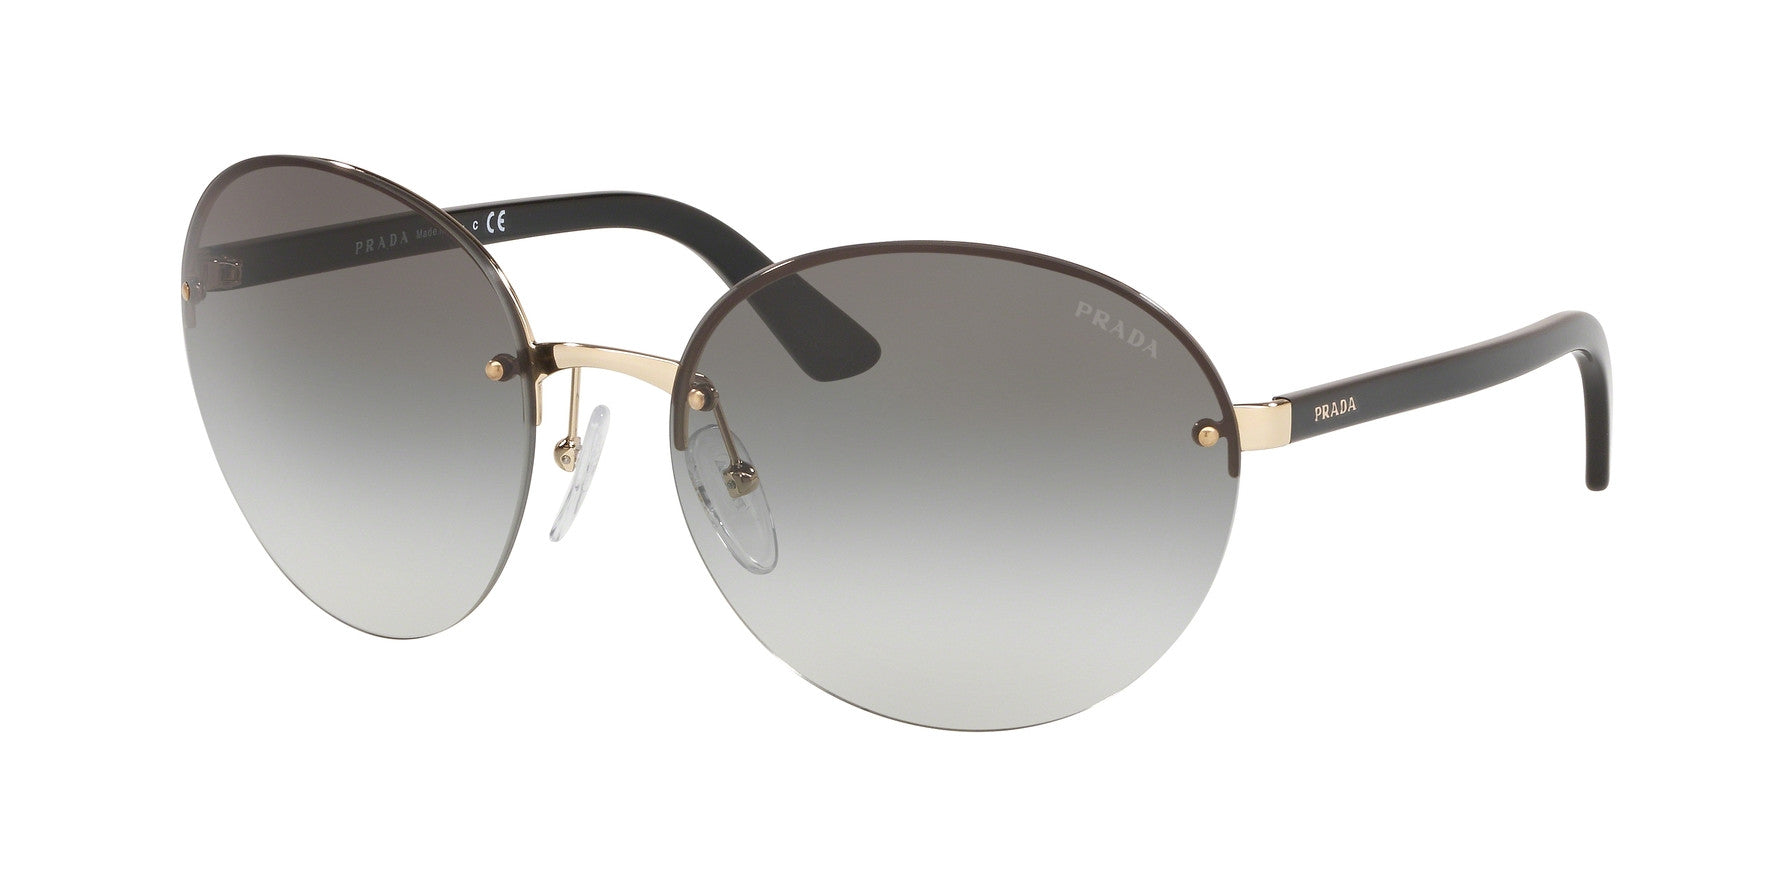 PRADA Women Round Sunglasses Anthracite Gray/Mauve Gradient Lenses [SPR13S  EUE0 F04K0] in Mehsana at best price by RAM OPTICALS - Justdial